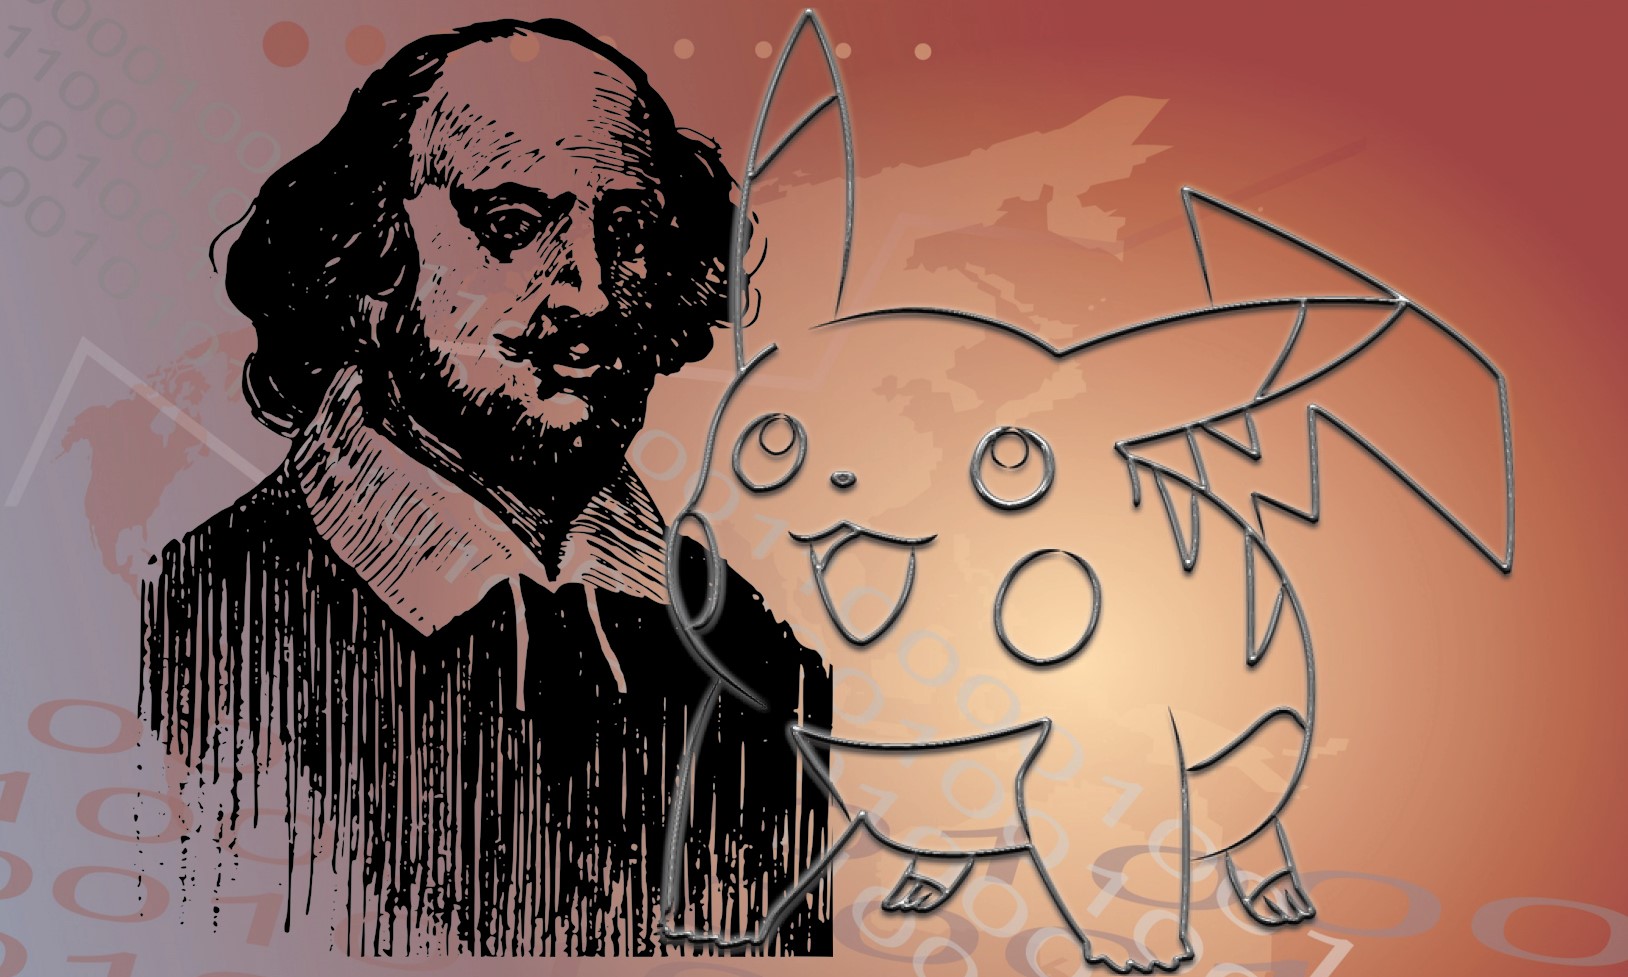 Illustration of Shakespeare and Pikachu over binary code